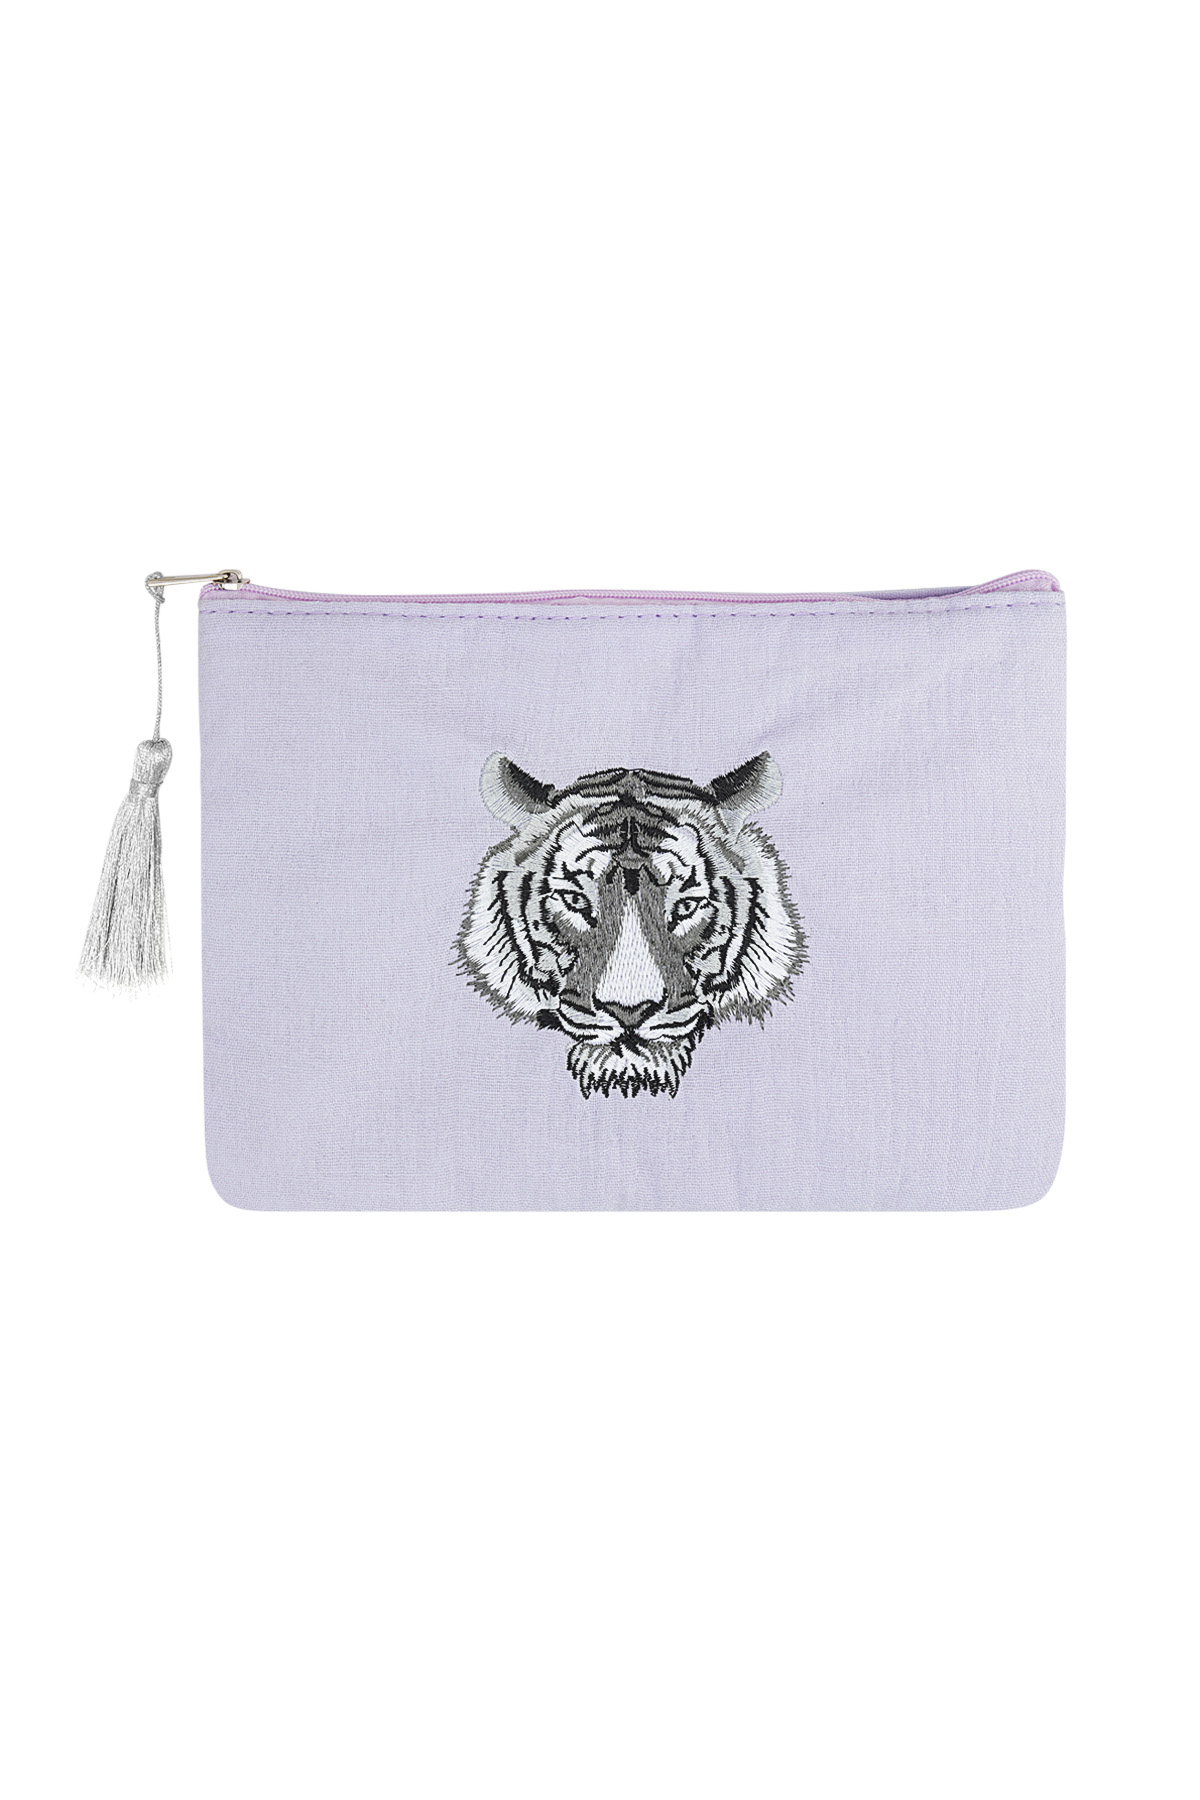 Make-up bag with tiger head - lilac 